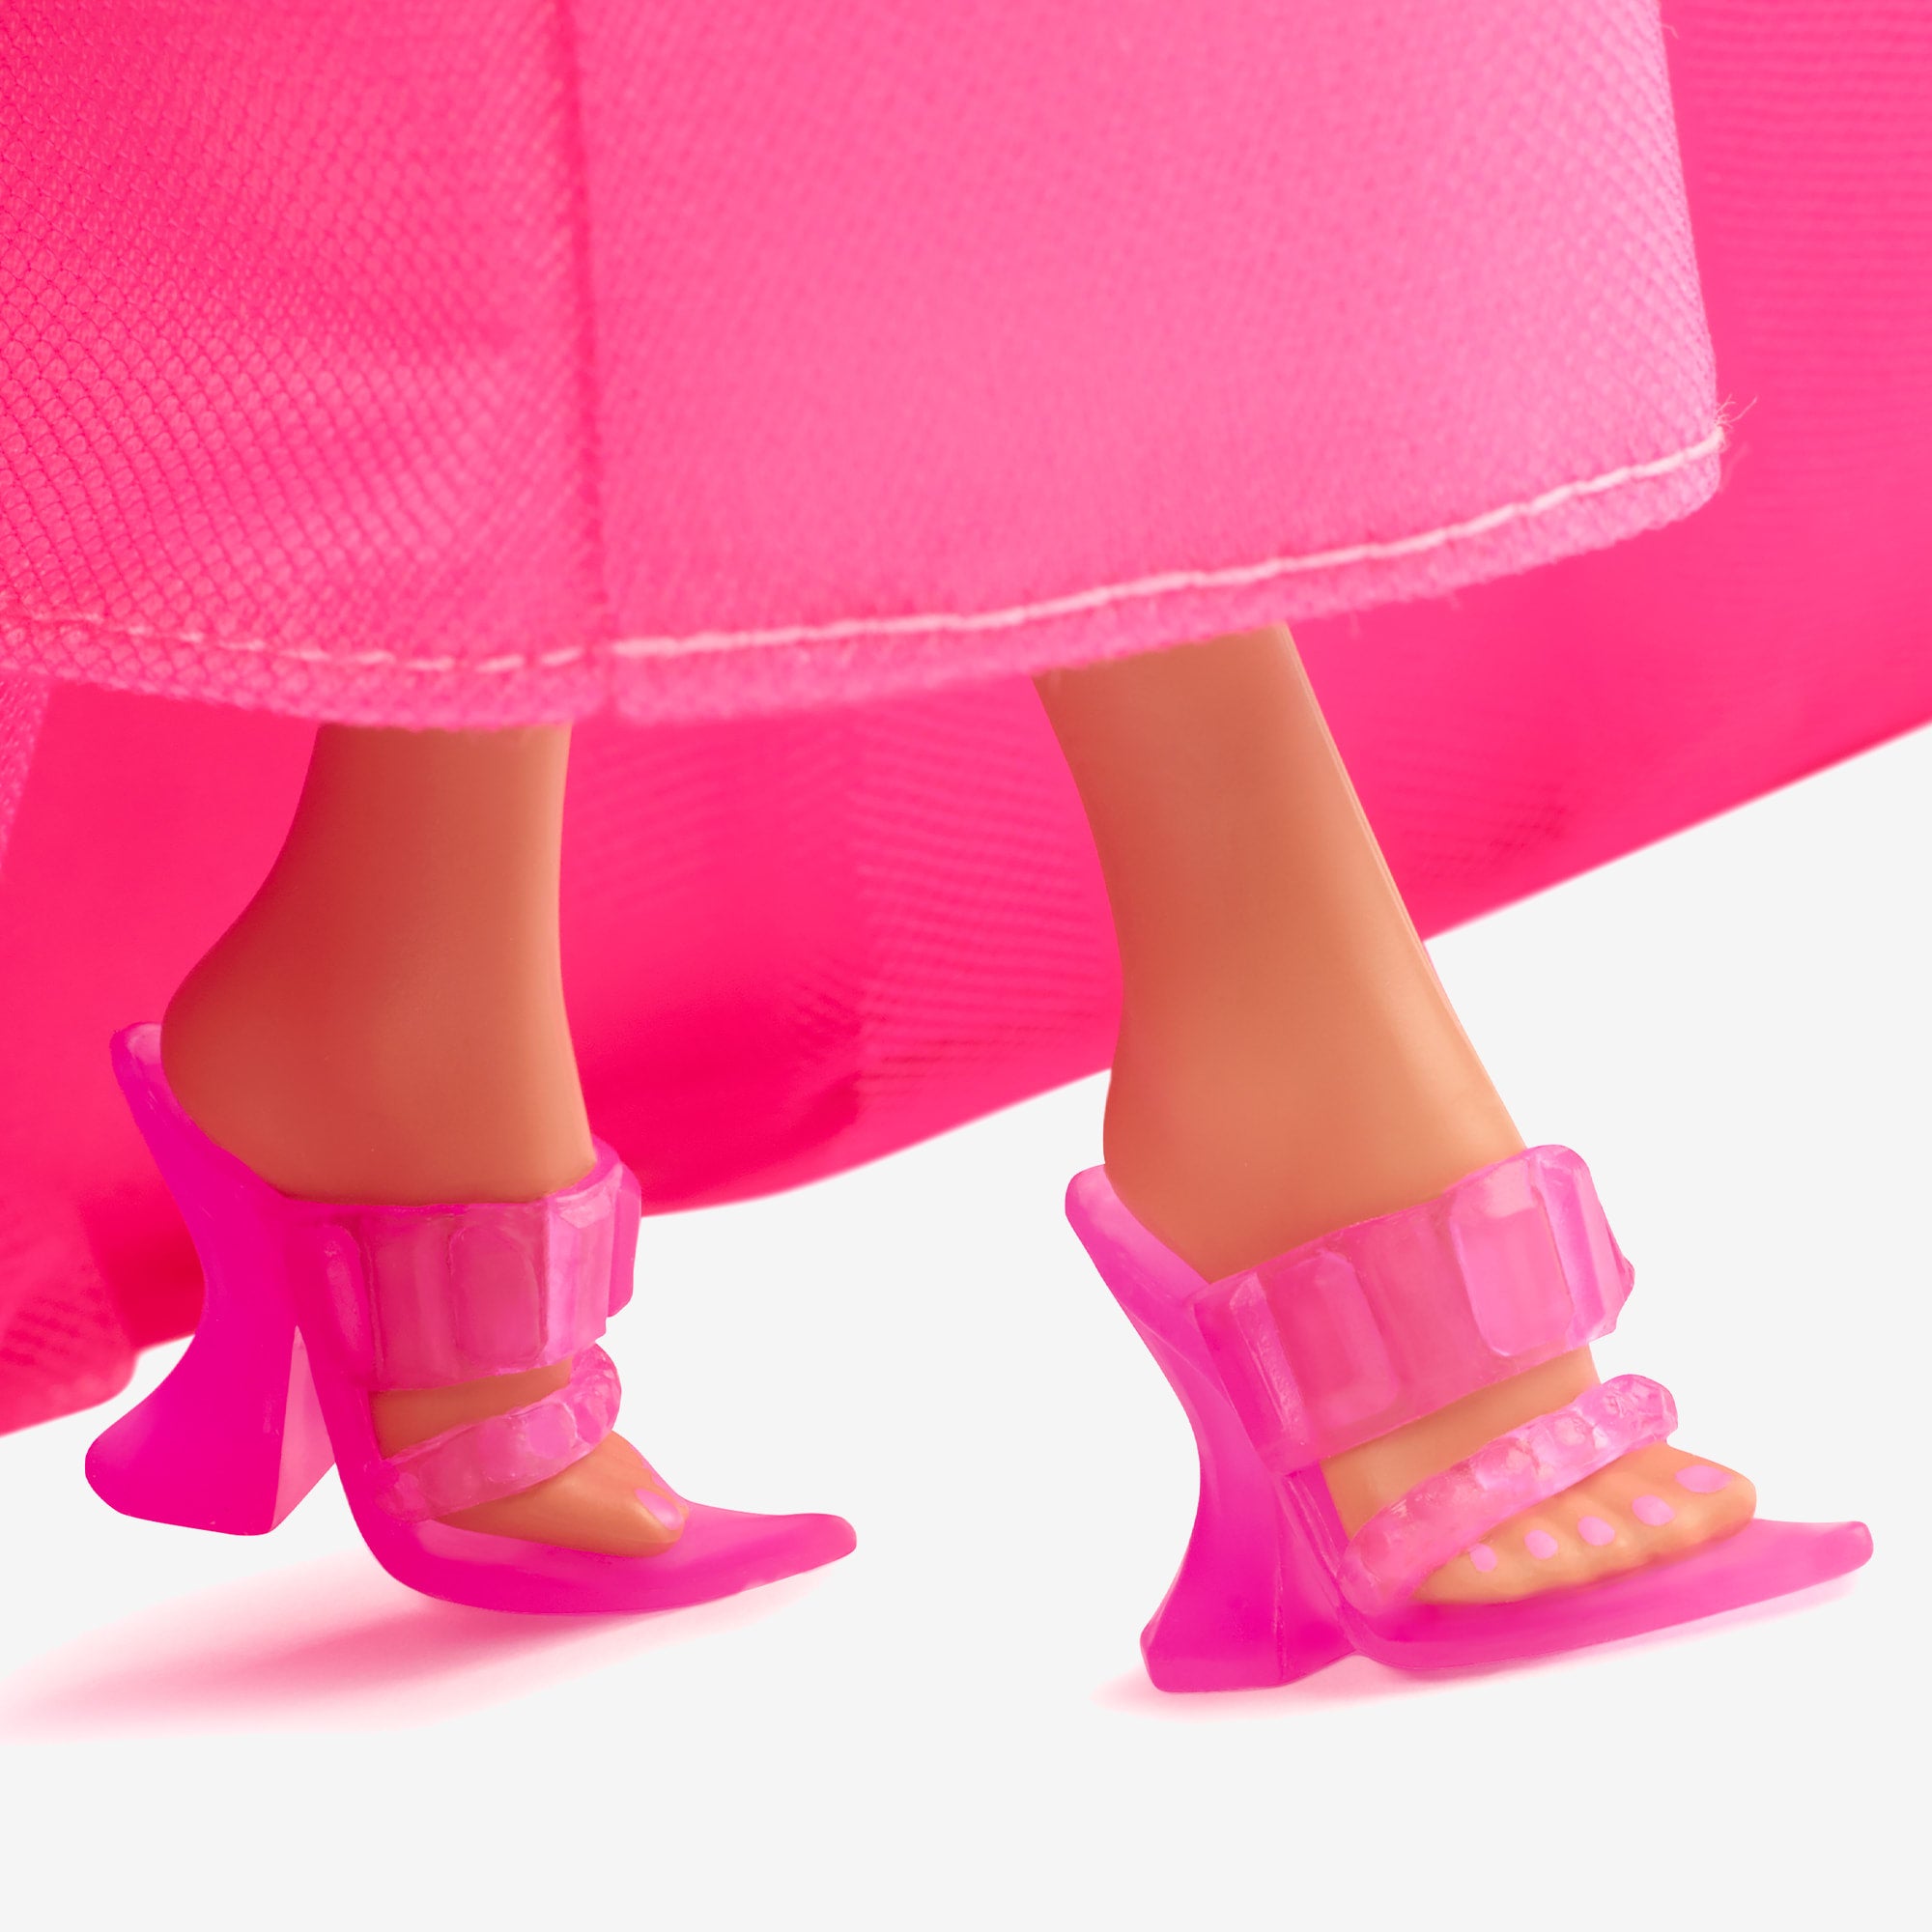 Barbie Pink Collection Doll 5 – Mattel Creations